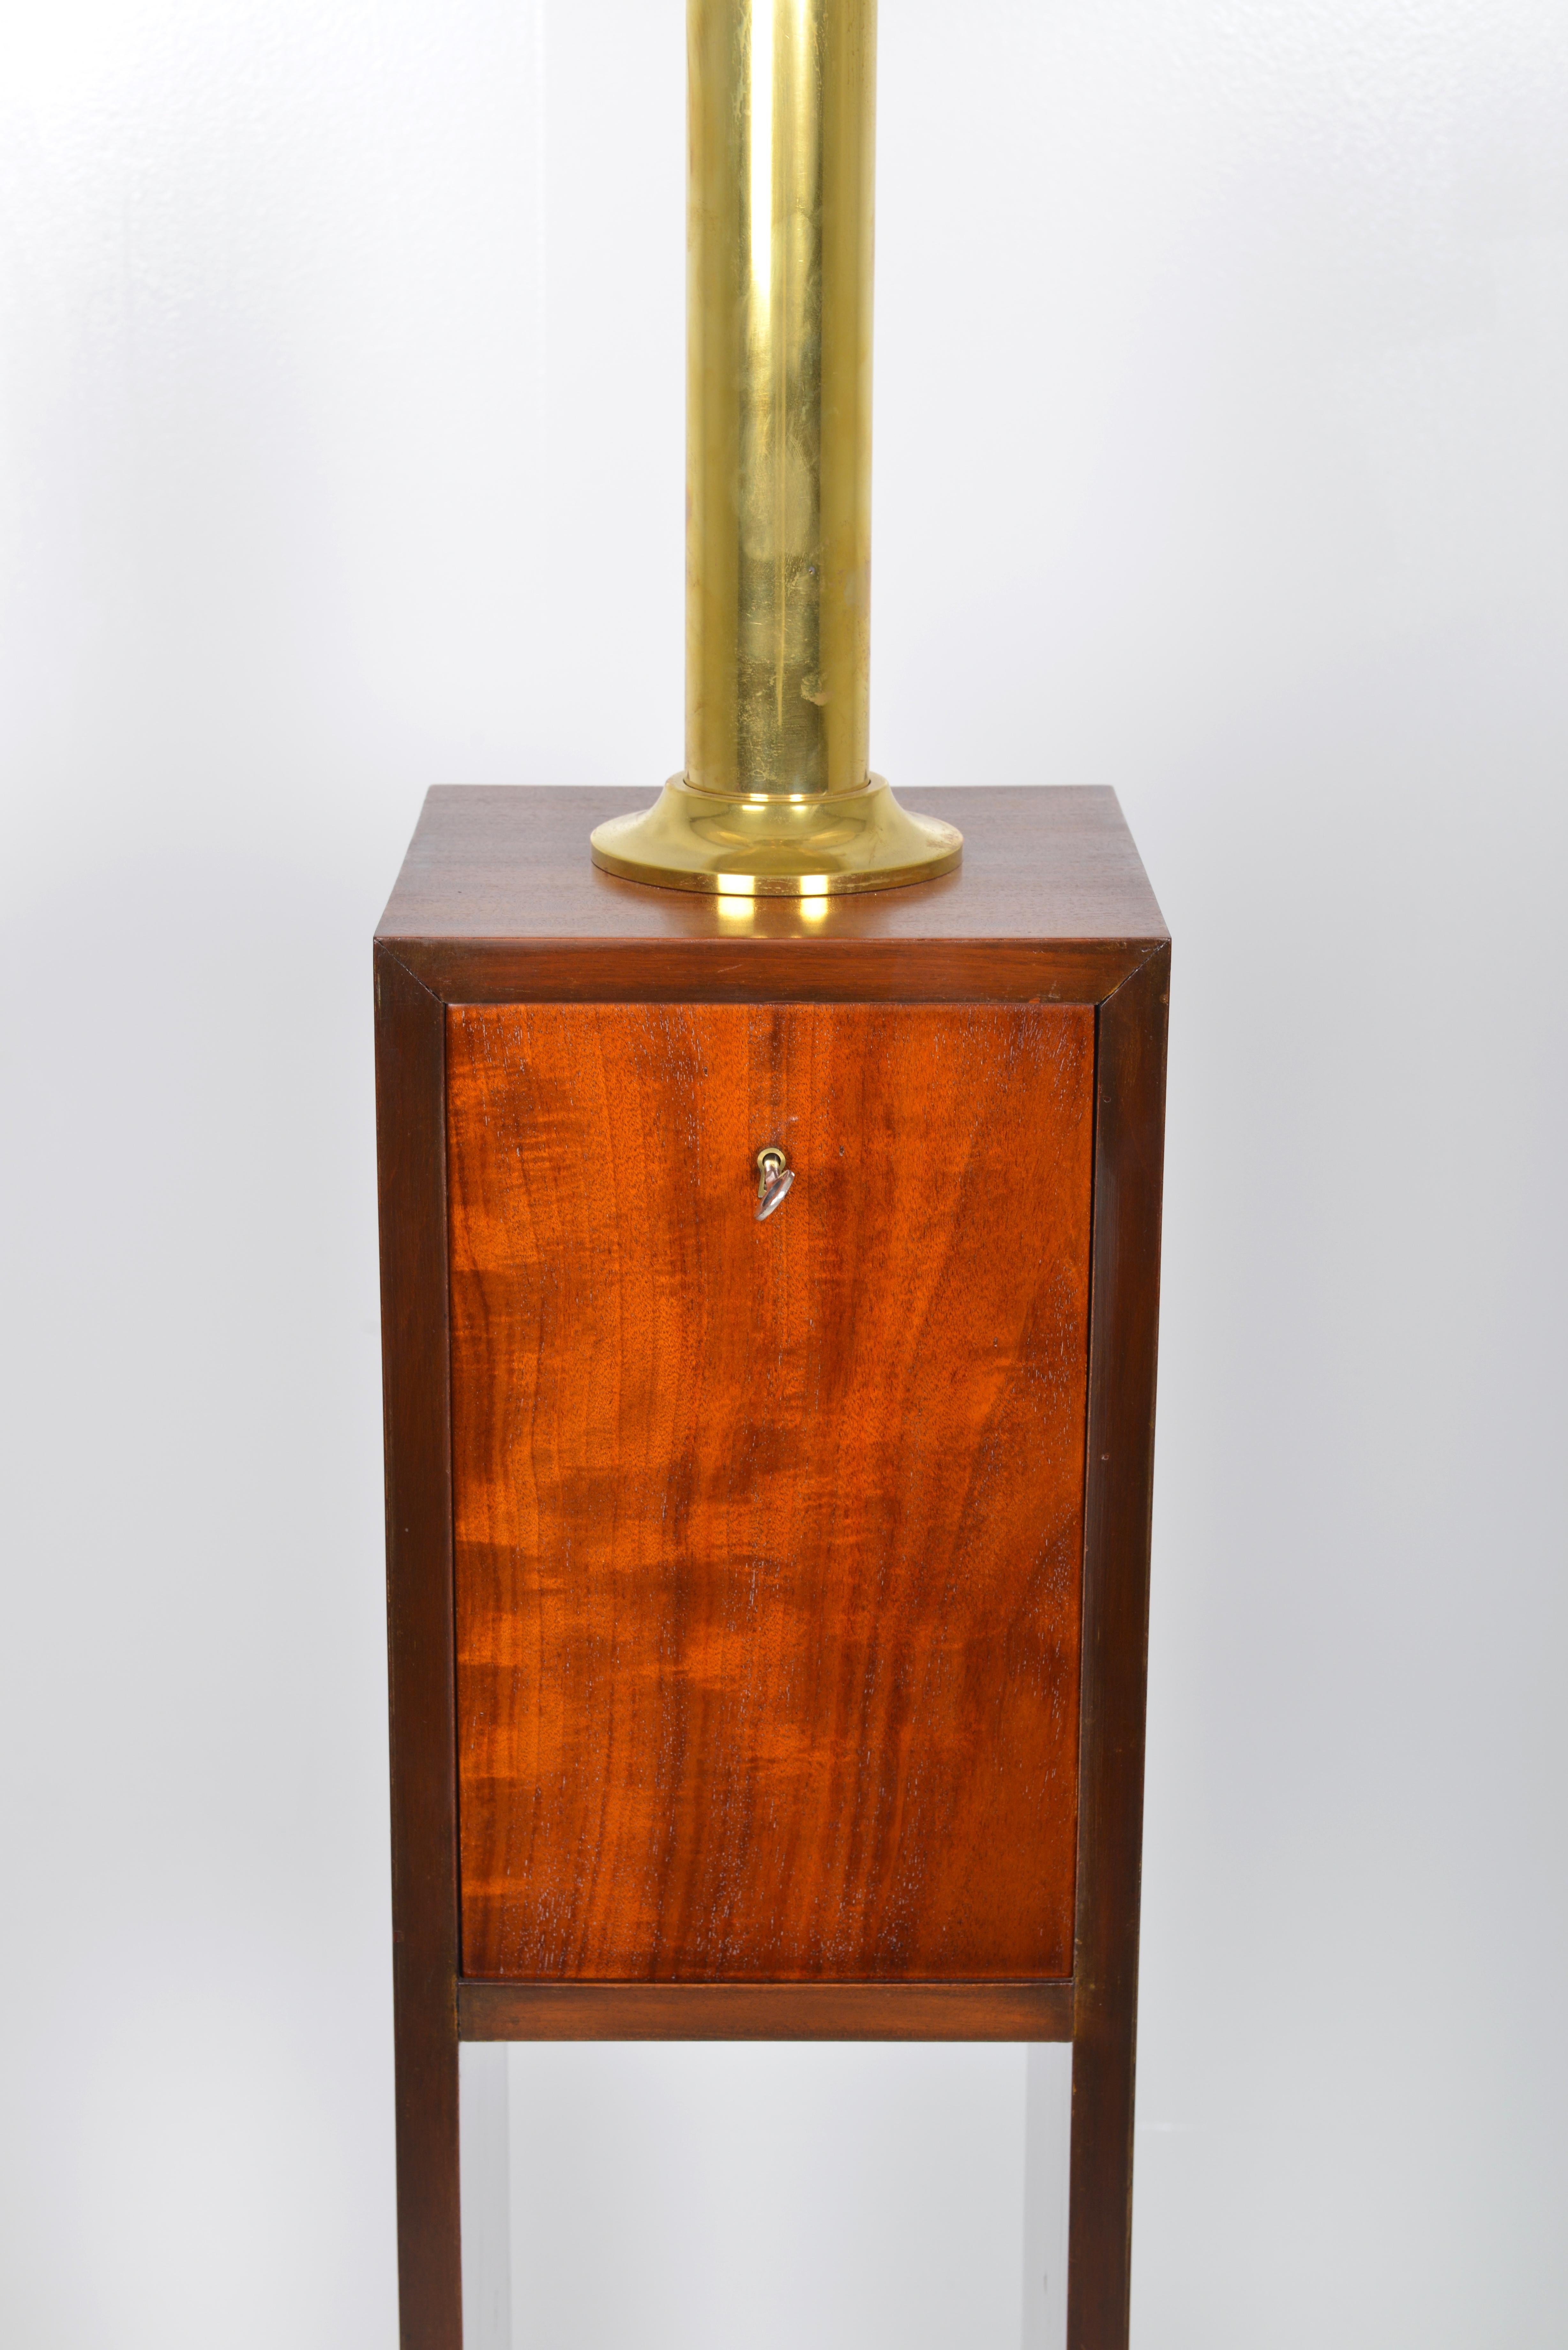 Extremely unusual library standard lamp made of solid mahogany, Belgian around 1930. The lamp features a wooden base with sweeping plinth, two bookshelves, a closed compartiment with drop front door, and on top of this a central brass uplighter and